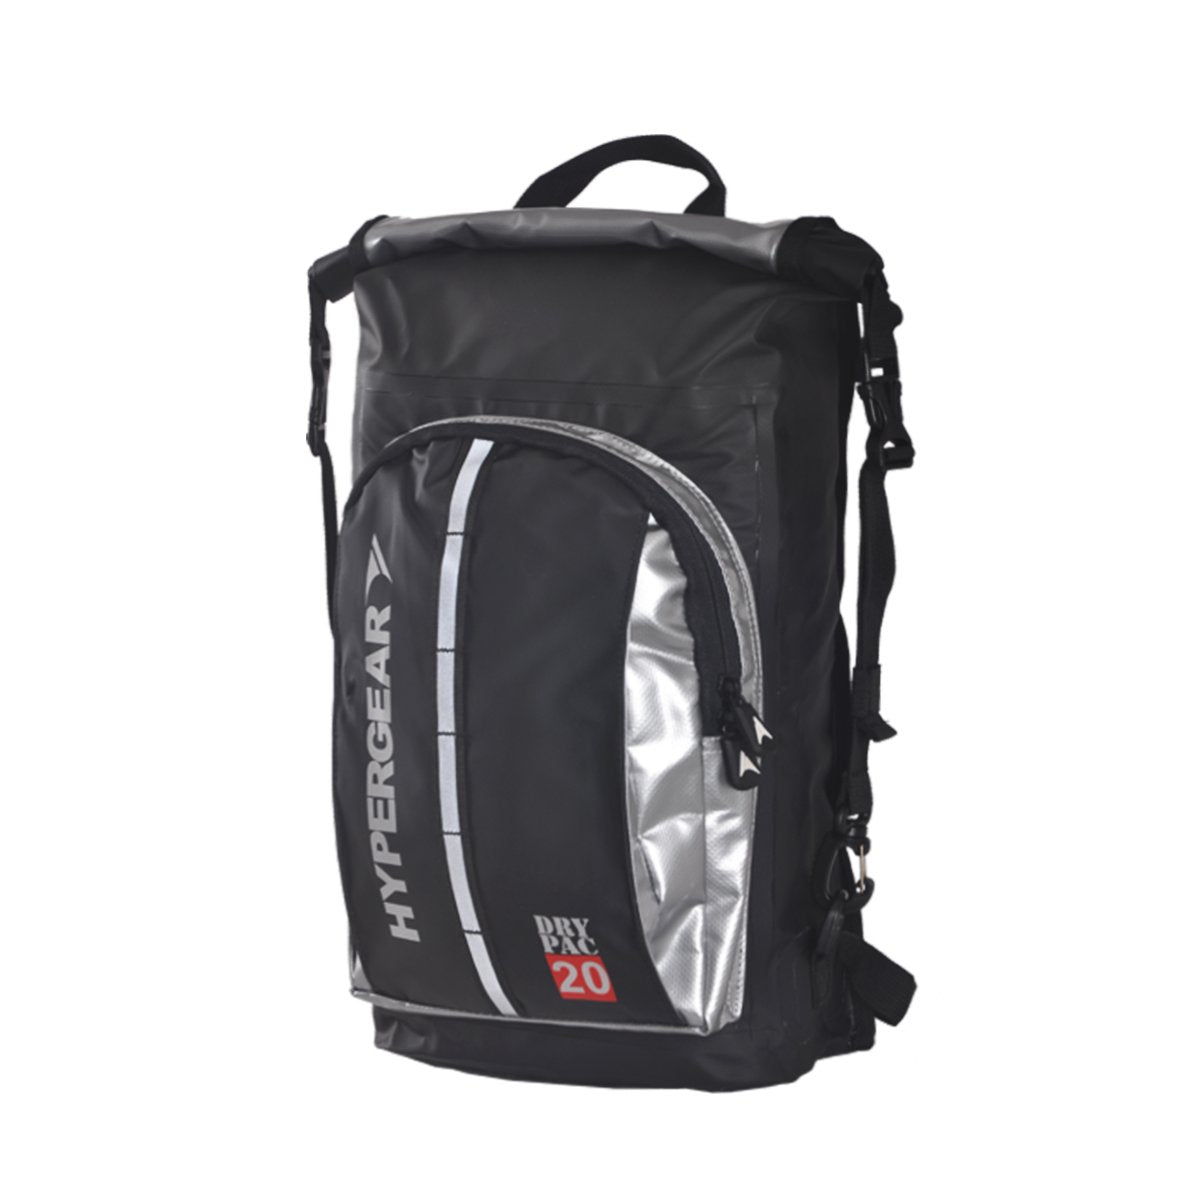 Dry Pac Compact 20L (Fast Slot Adapt) - Hypergear Singapore